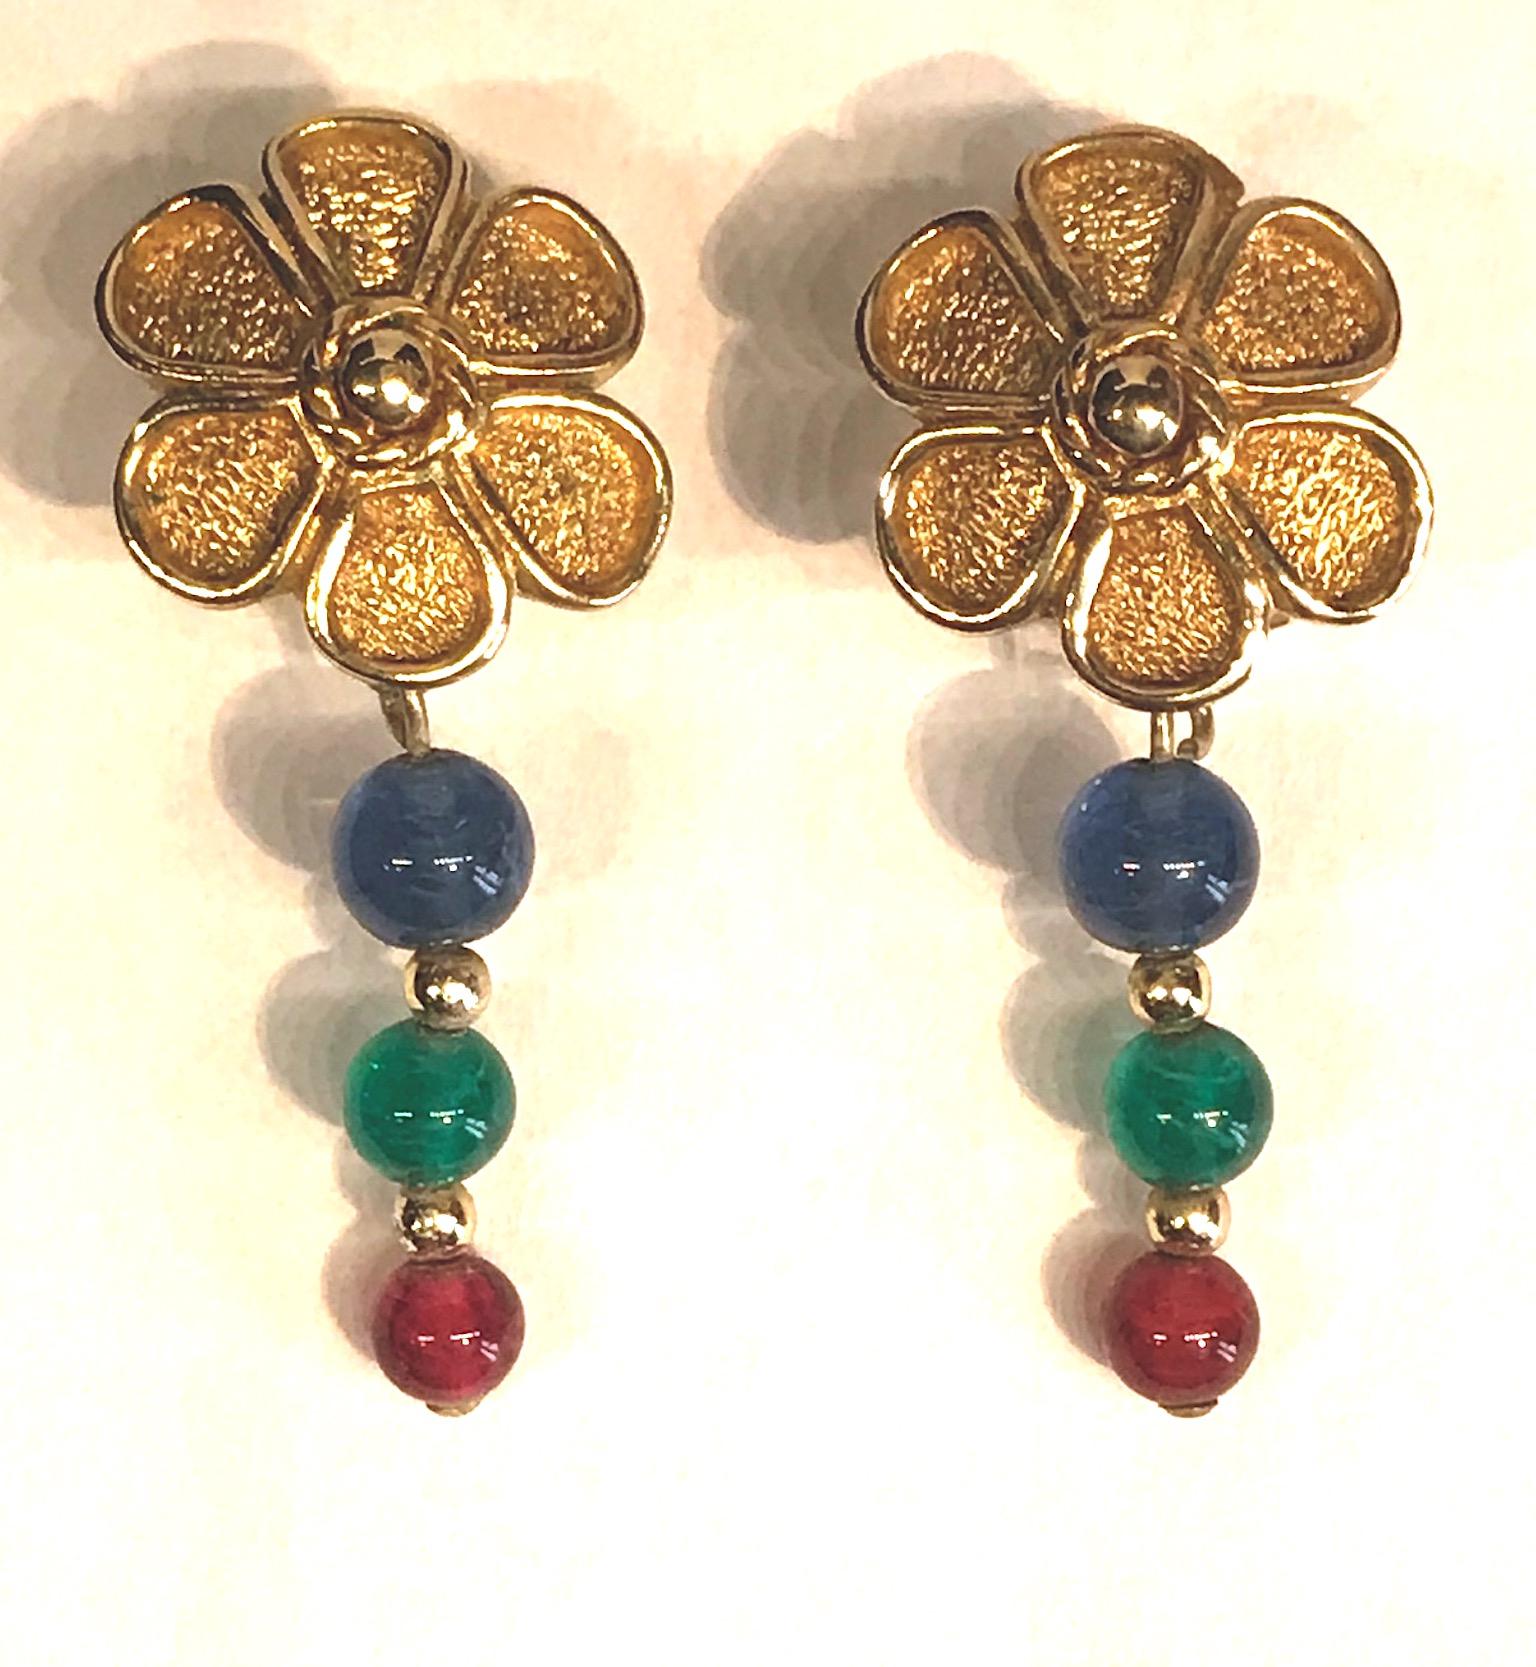 Grosse Germany 1980s Flower Earrings with Red, Blue & Green Beads 7